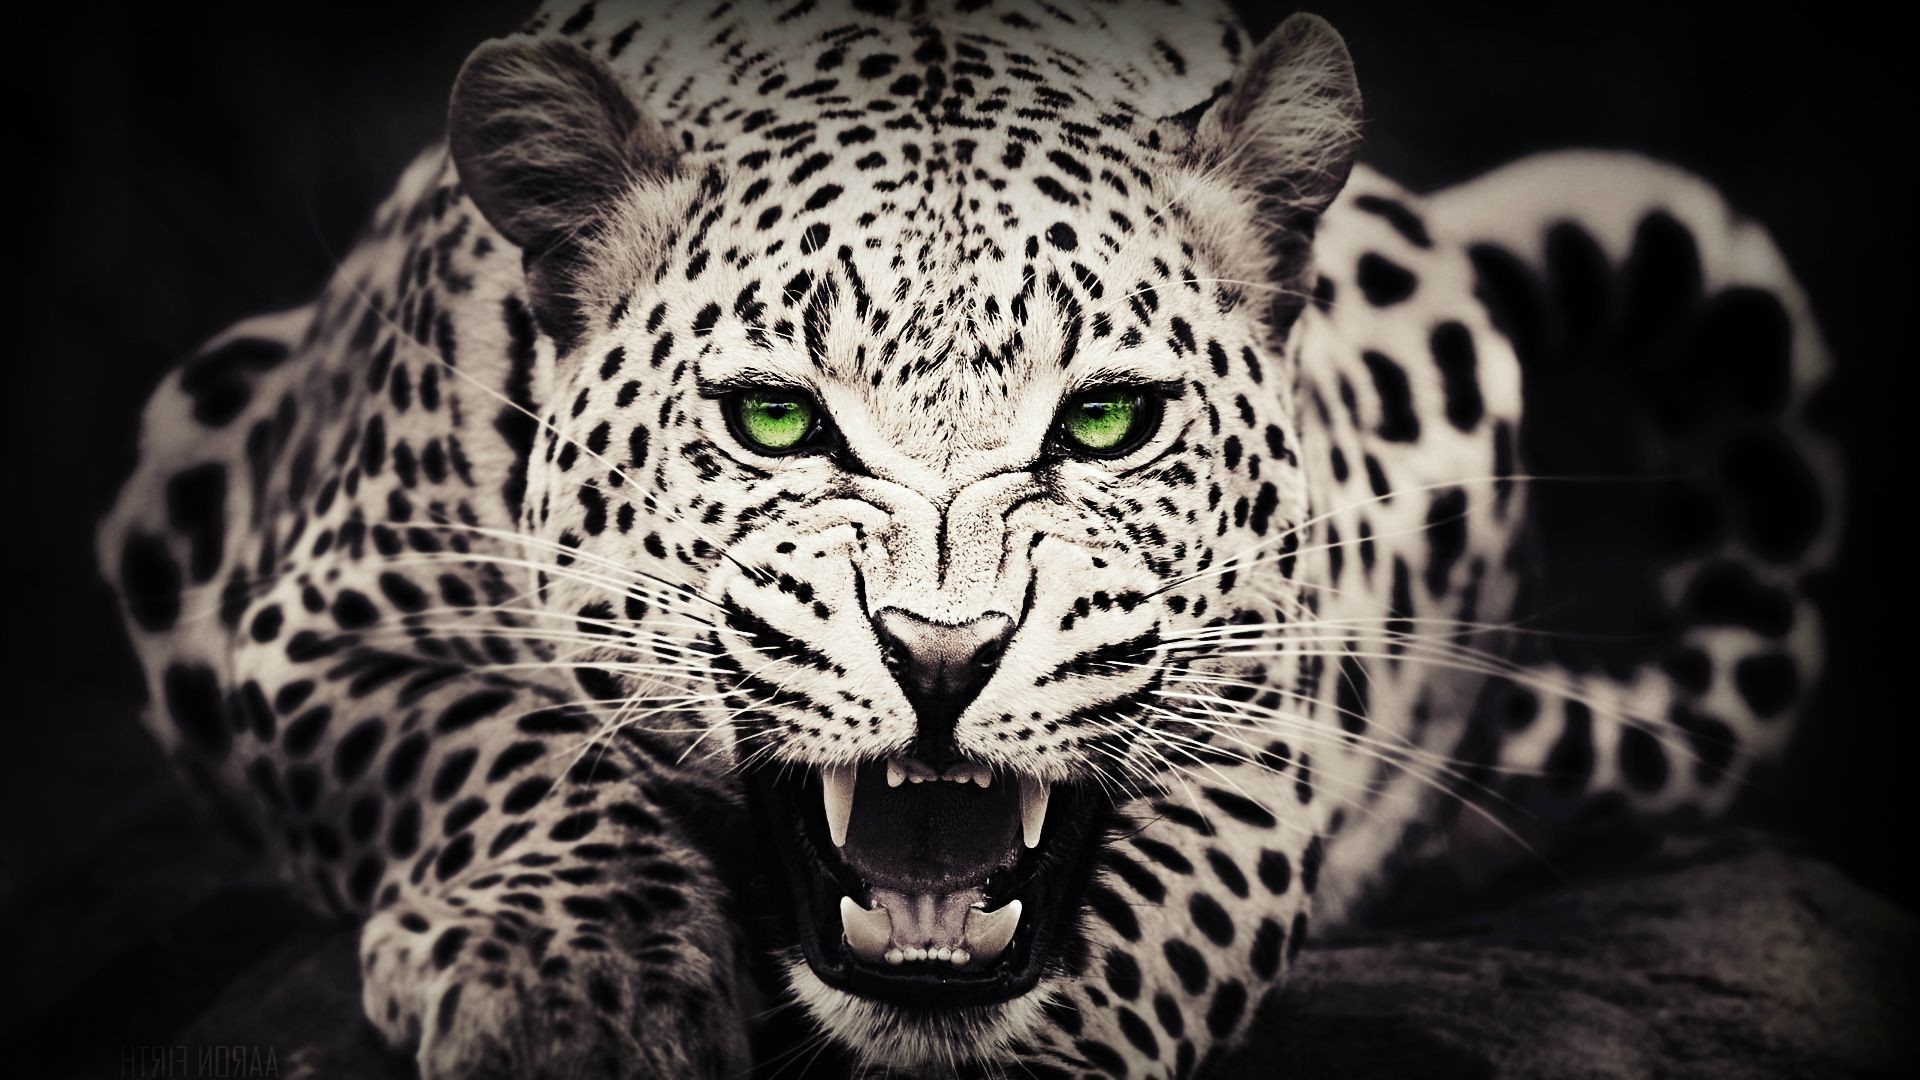 Wallpaper, animals, green eyes, wildlife, big cats, whiskers, leopard, Jaguar, fauna, 1920x1080 px, black and white, monochrome photography, vertebrate, close up, cat like mammal 1920x1080